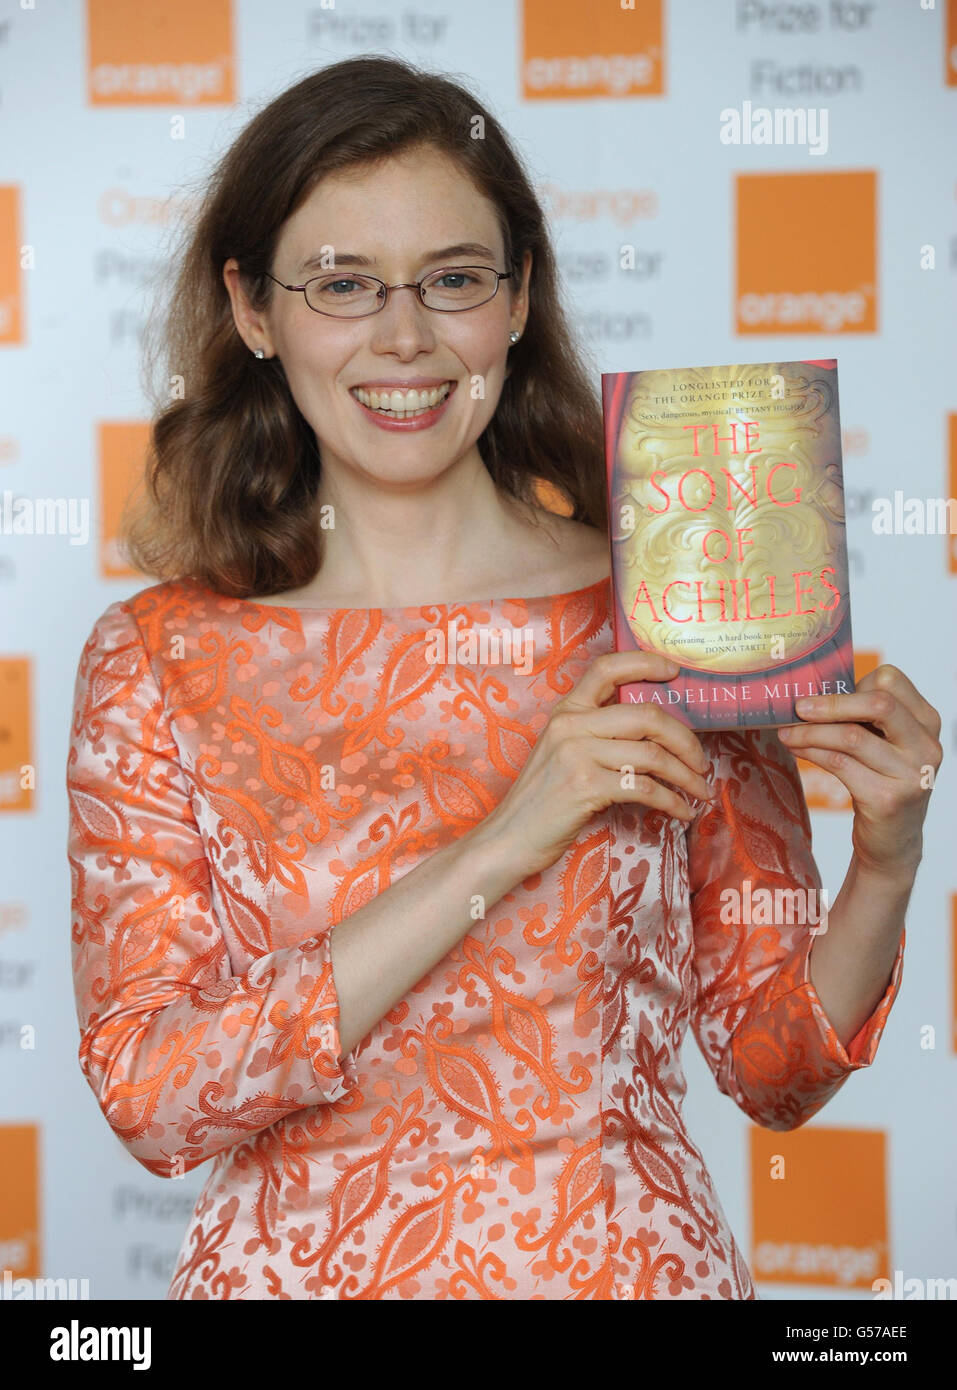 Madeline Miller poses with her book The Song of Achilles during